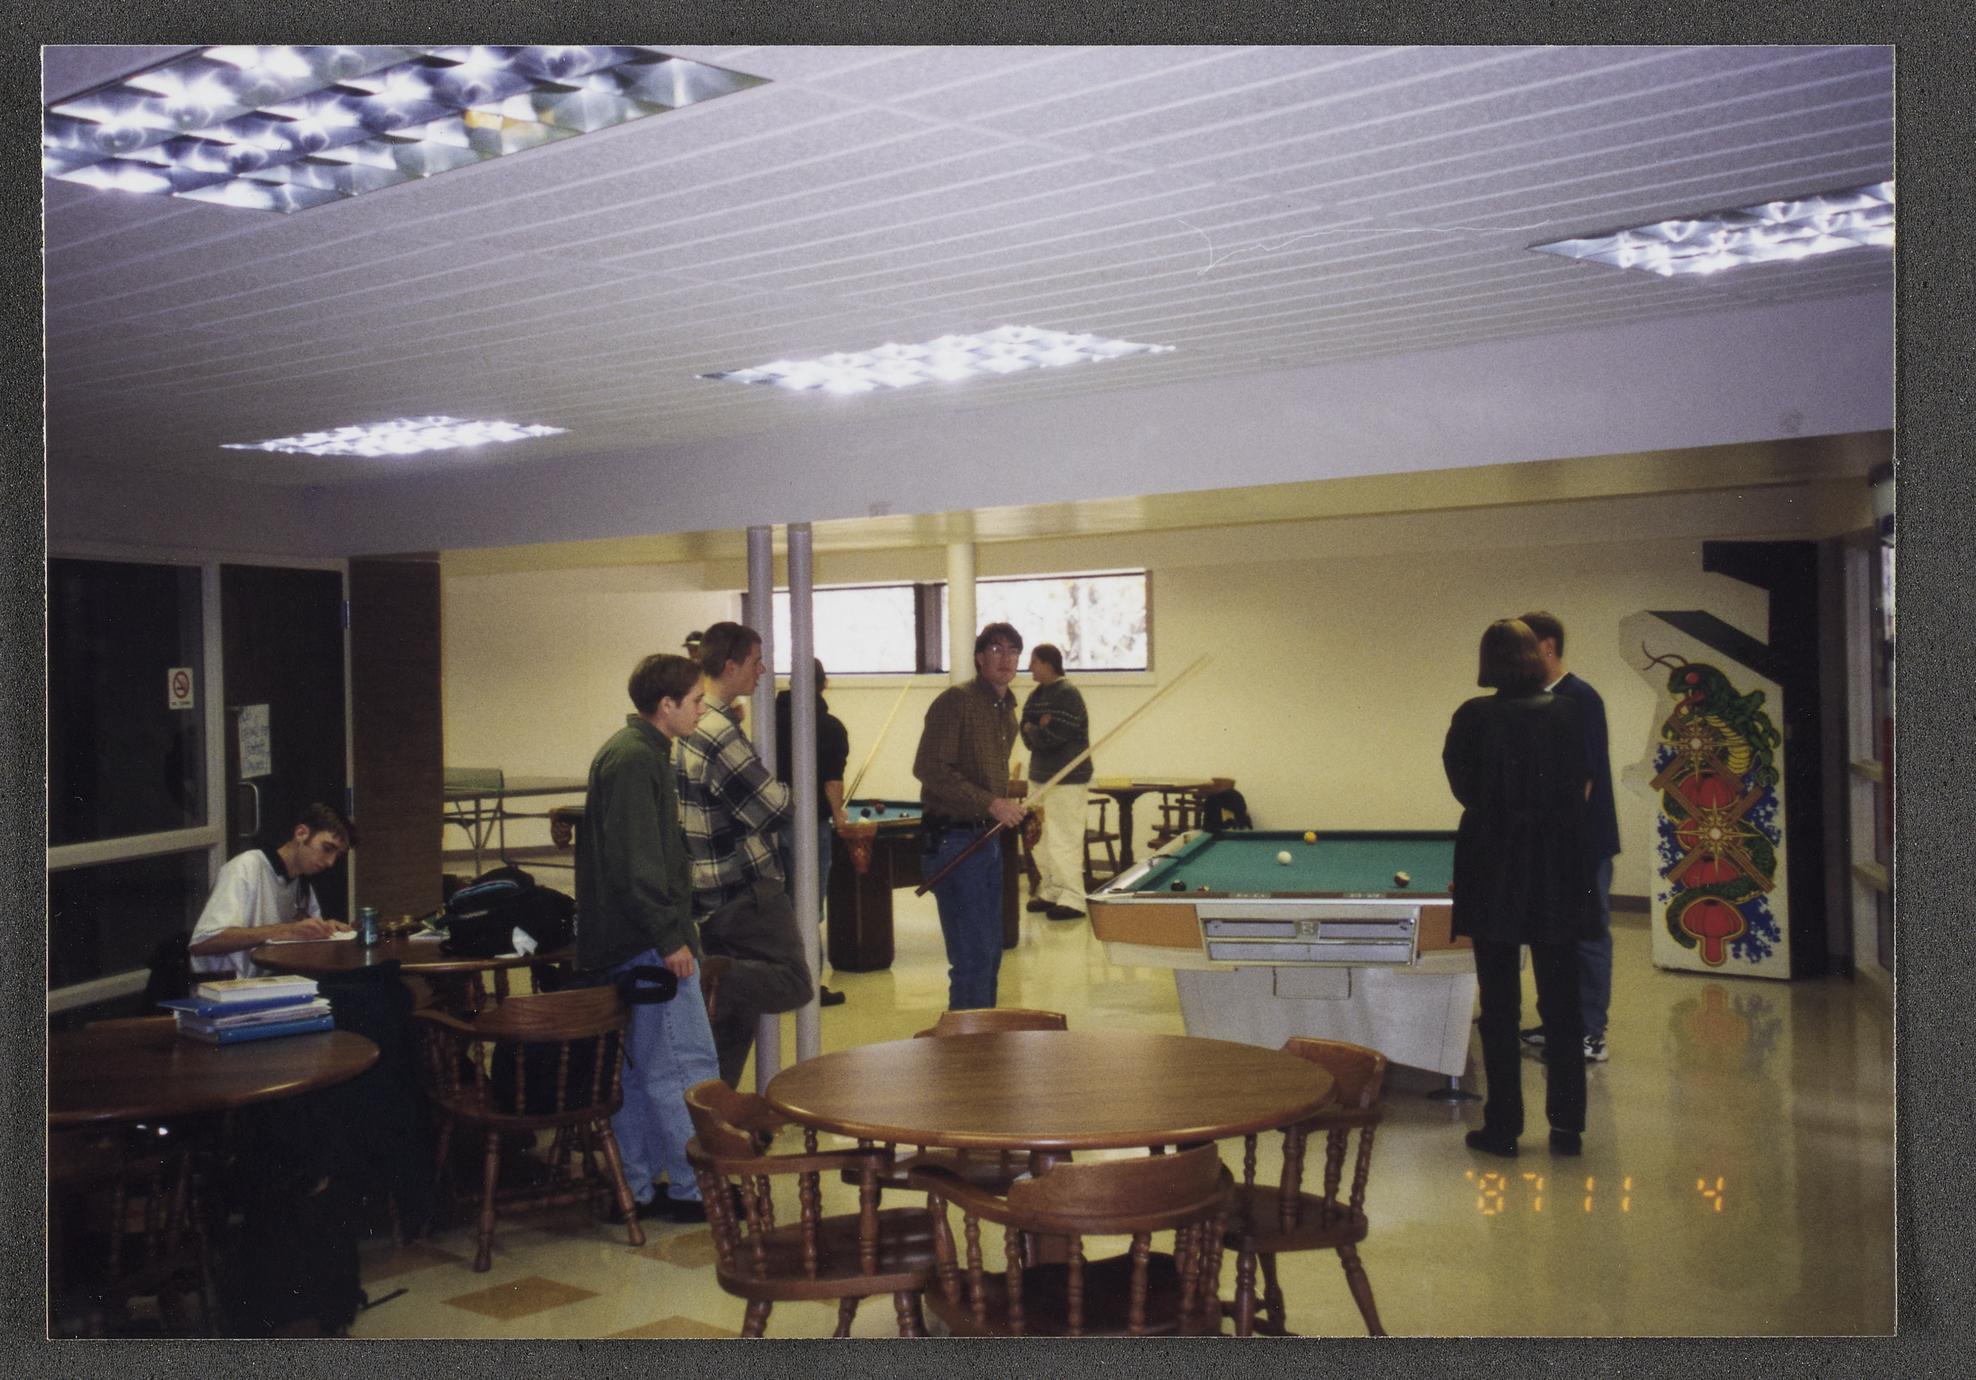 Students playing pool, studying and interacting in the student union